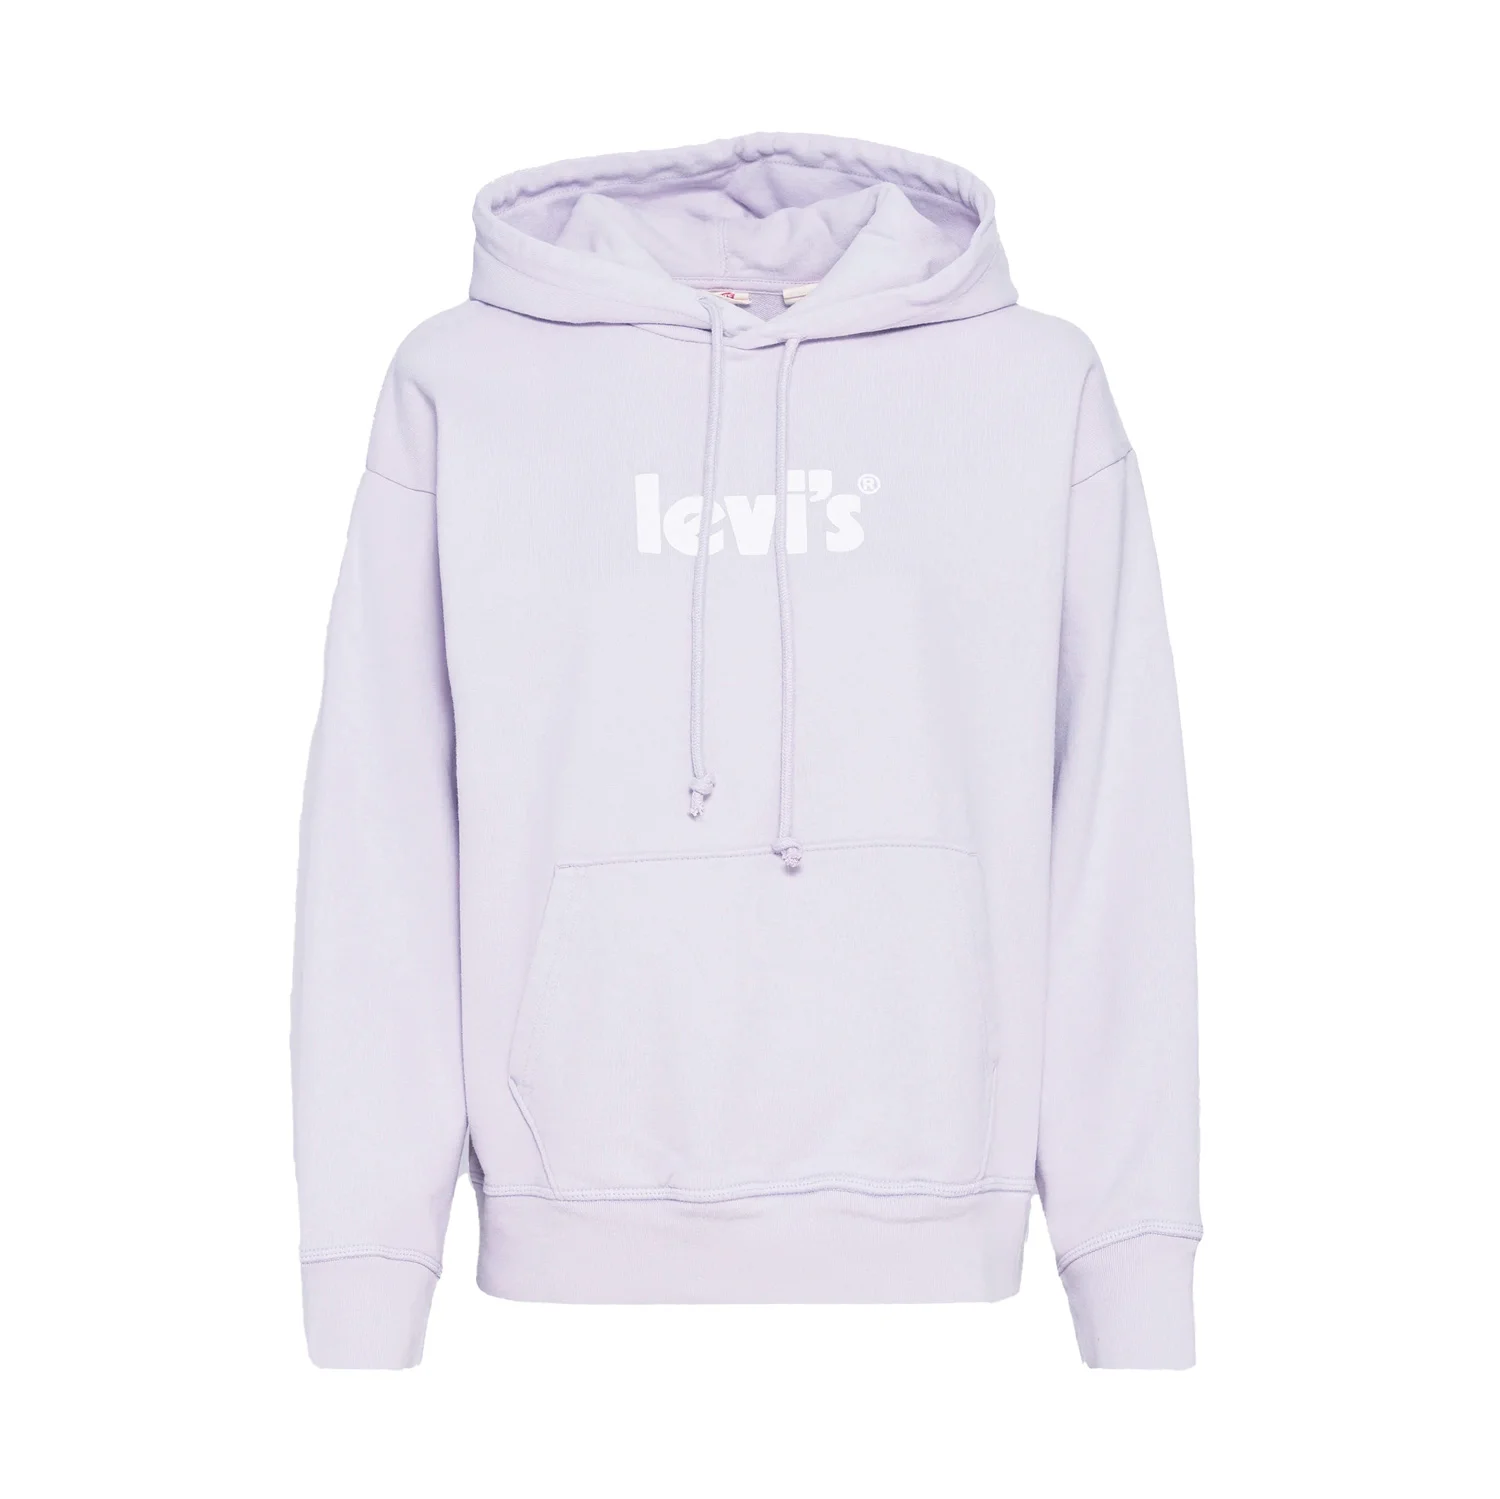 Levis Women's Graphic Standard Poster Logo Hoodie - Misty Lilac